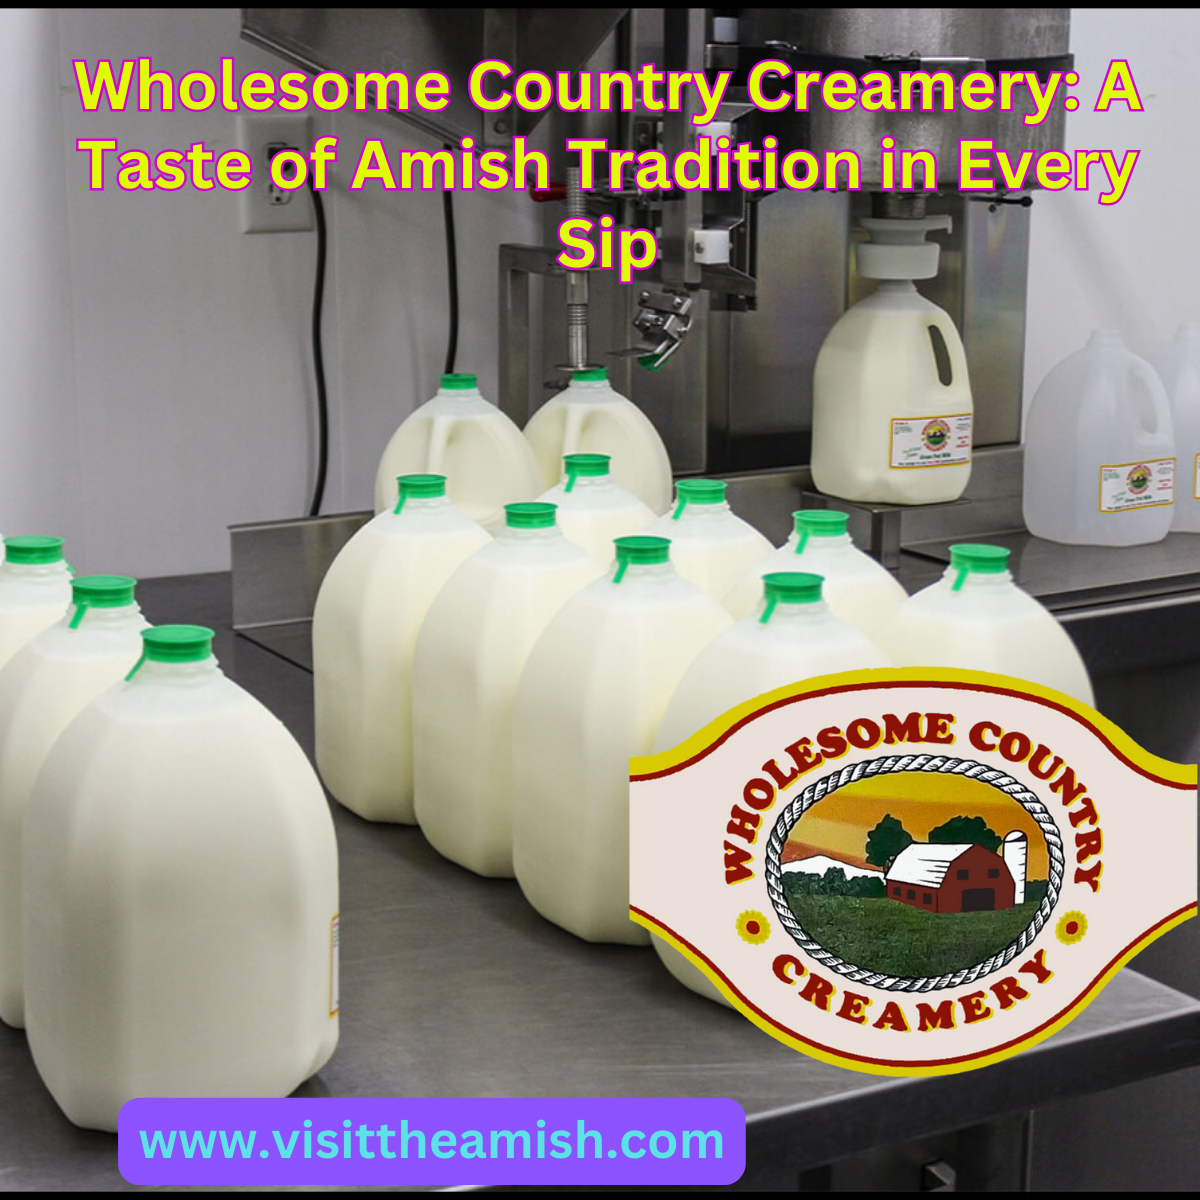 Wholesome Country Creamery 6400 Windsor Road Hamptonville, NC